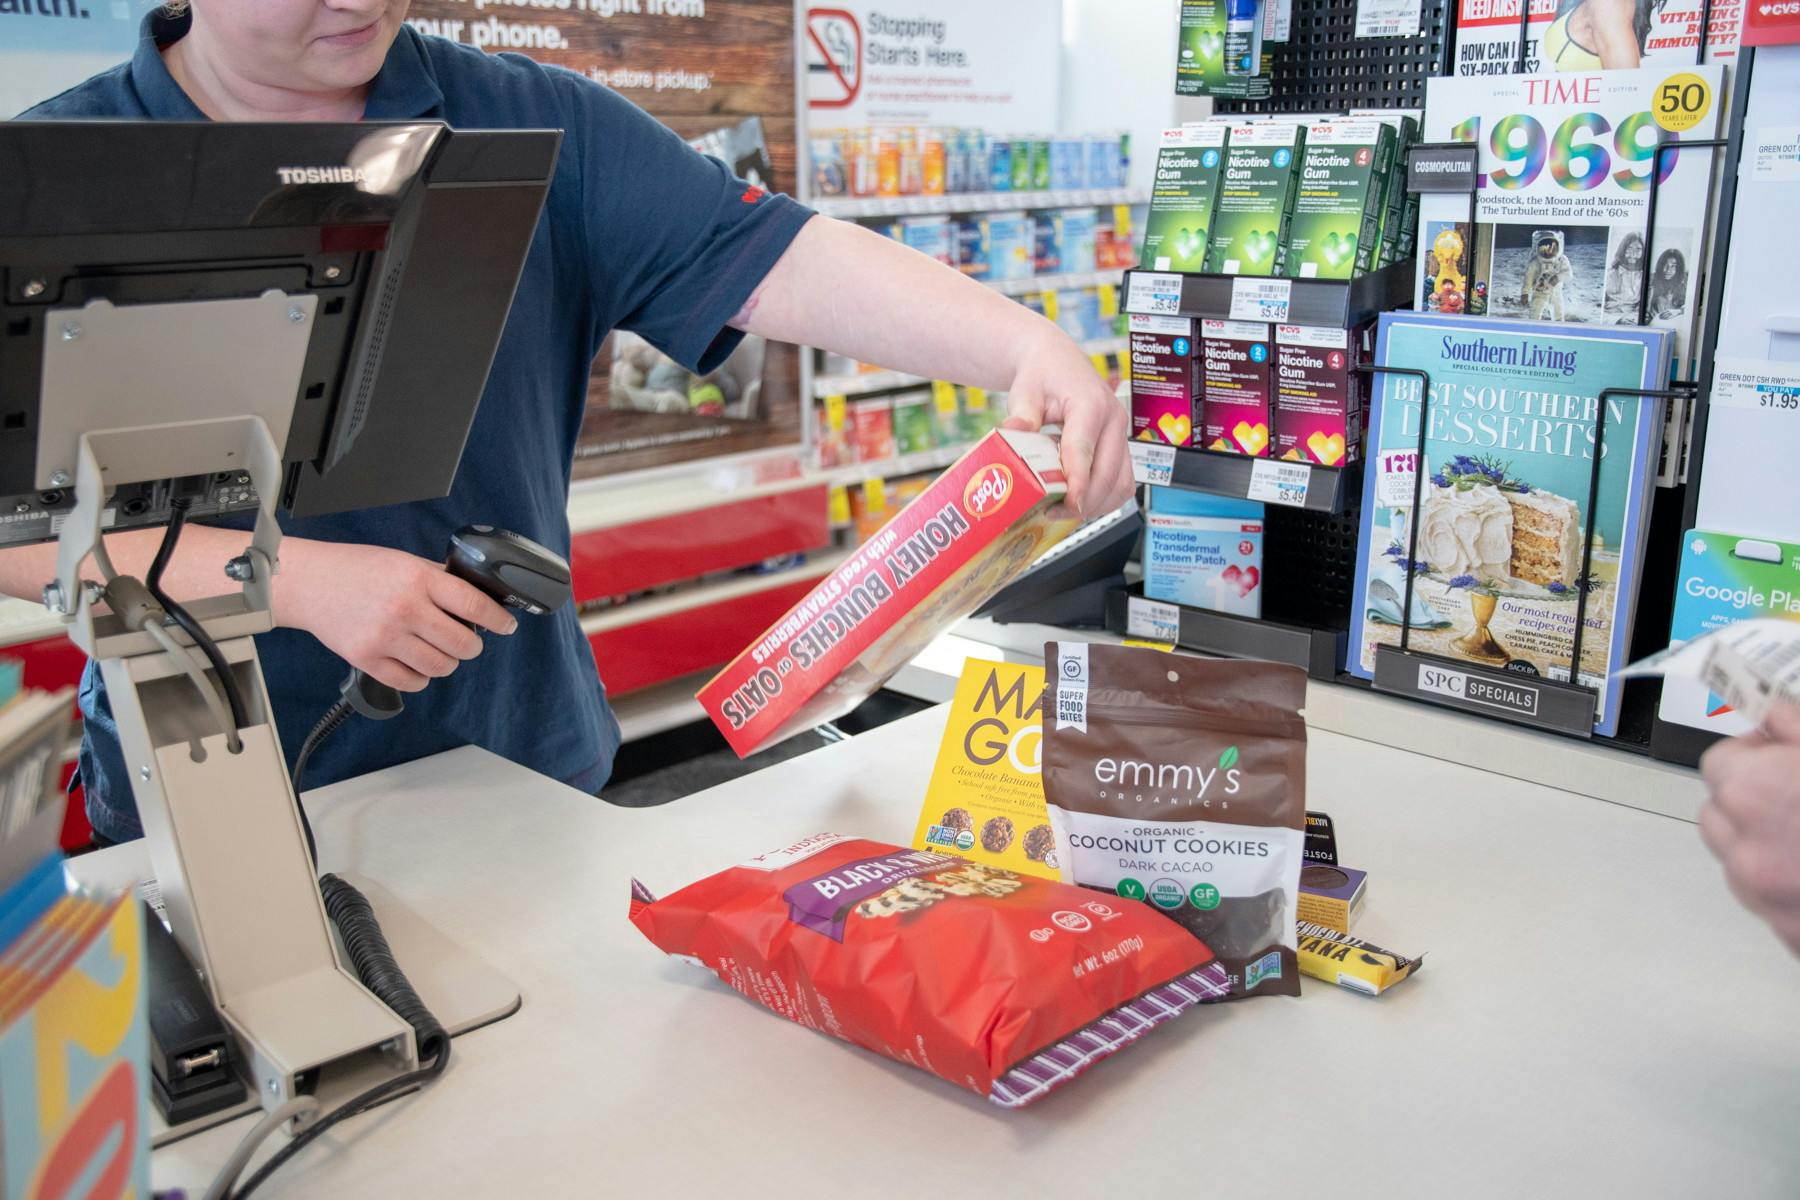 A CVS clerk scanning a product at the register in a CVS store.